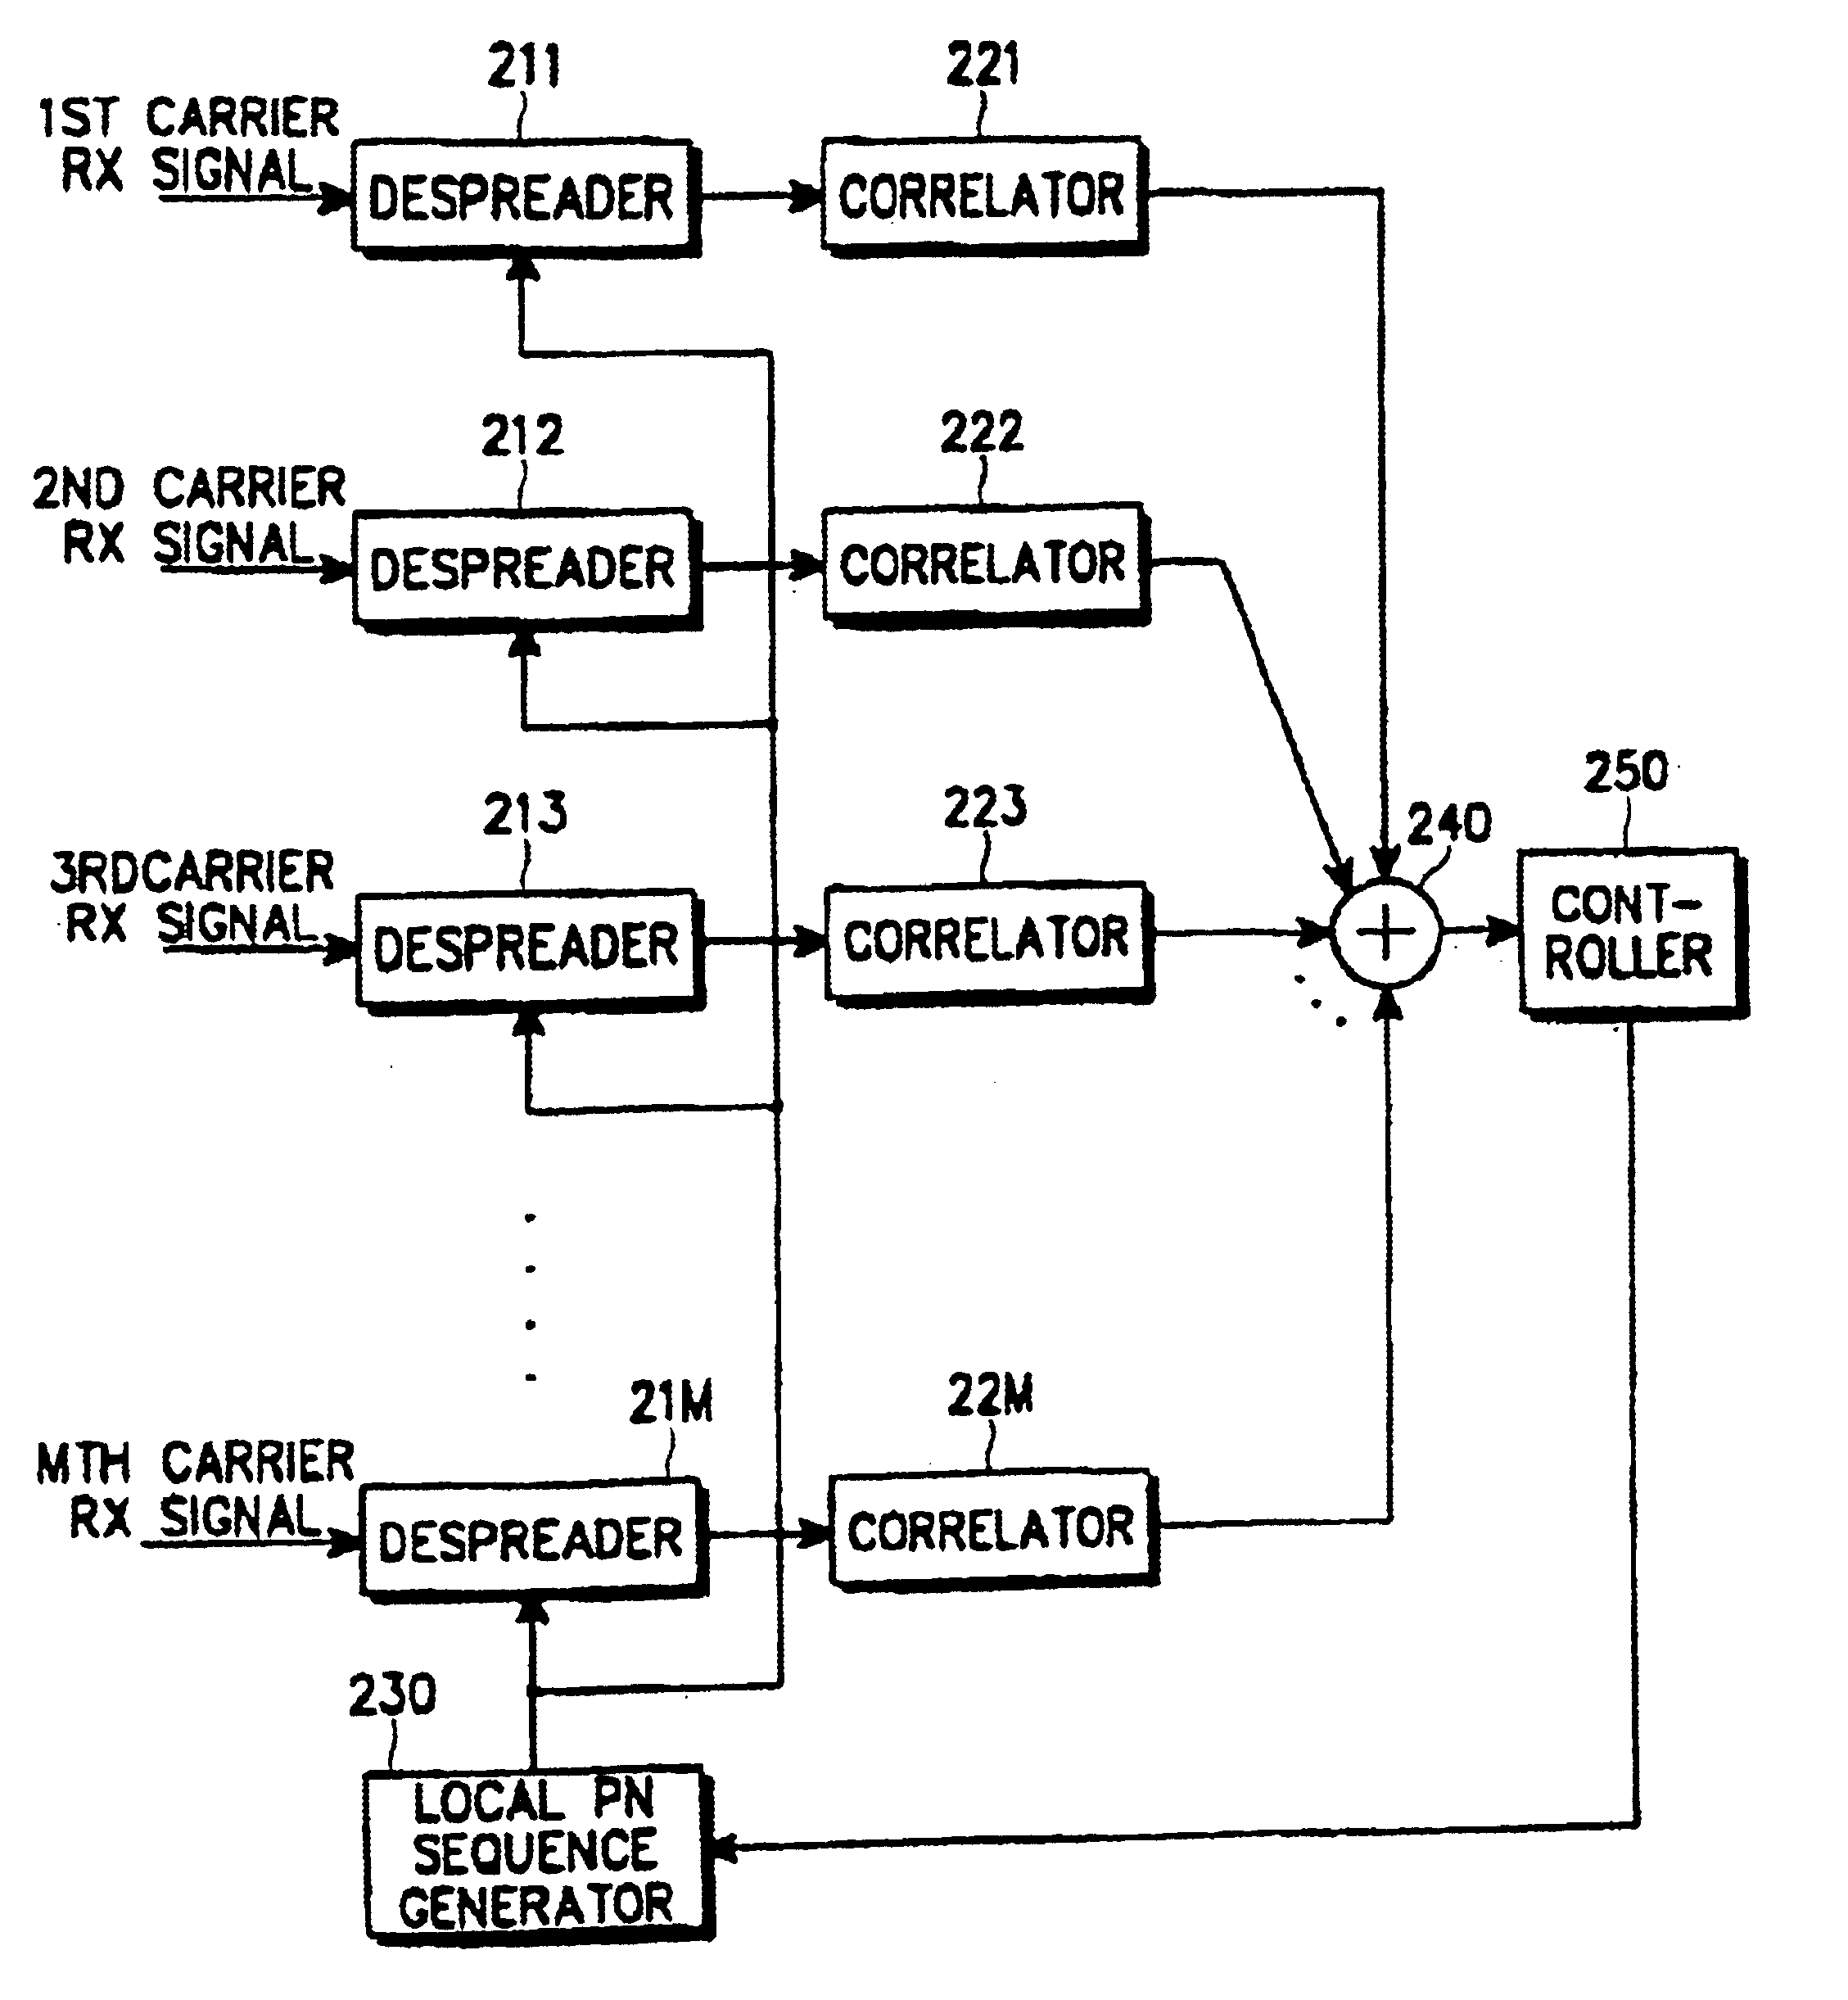 Apparatus and method for acquiring PN sequence in multicarrier CDMA mobile communication system